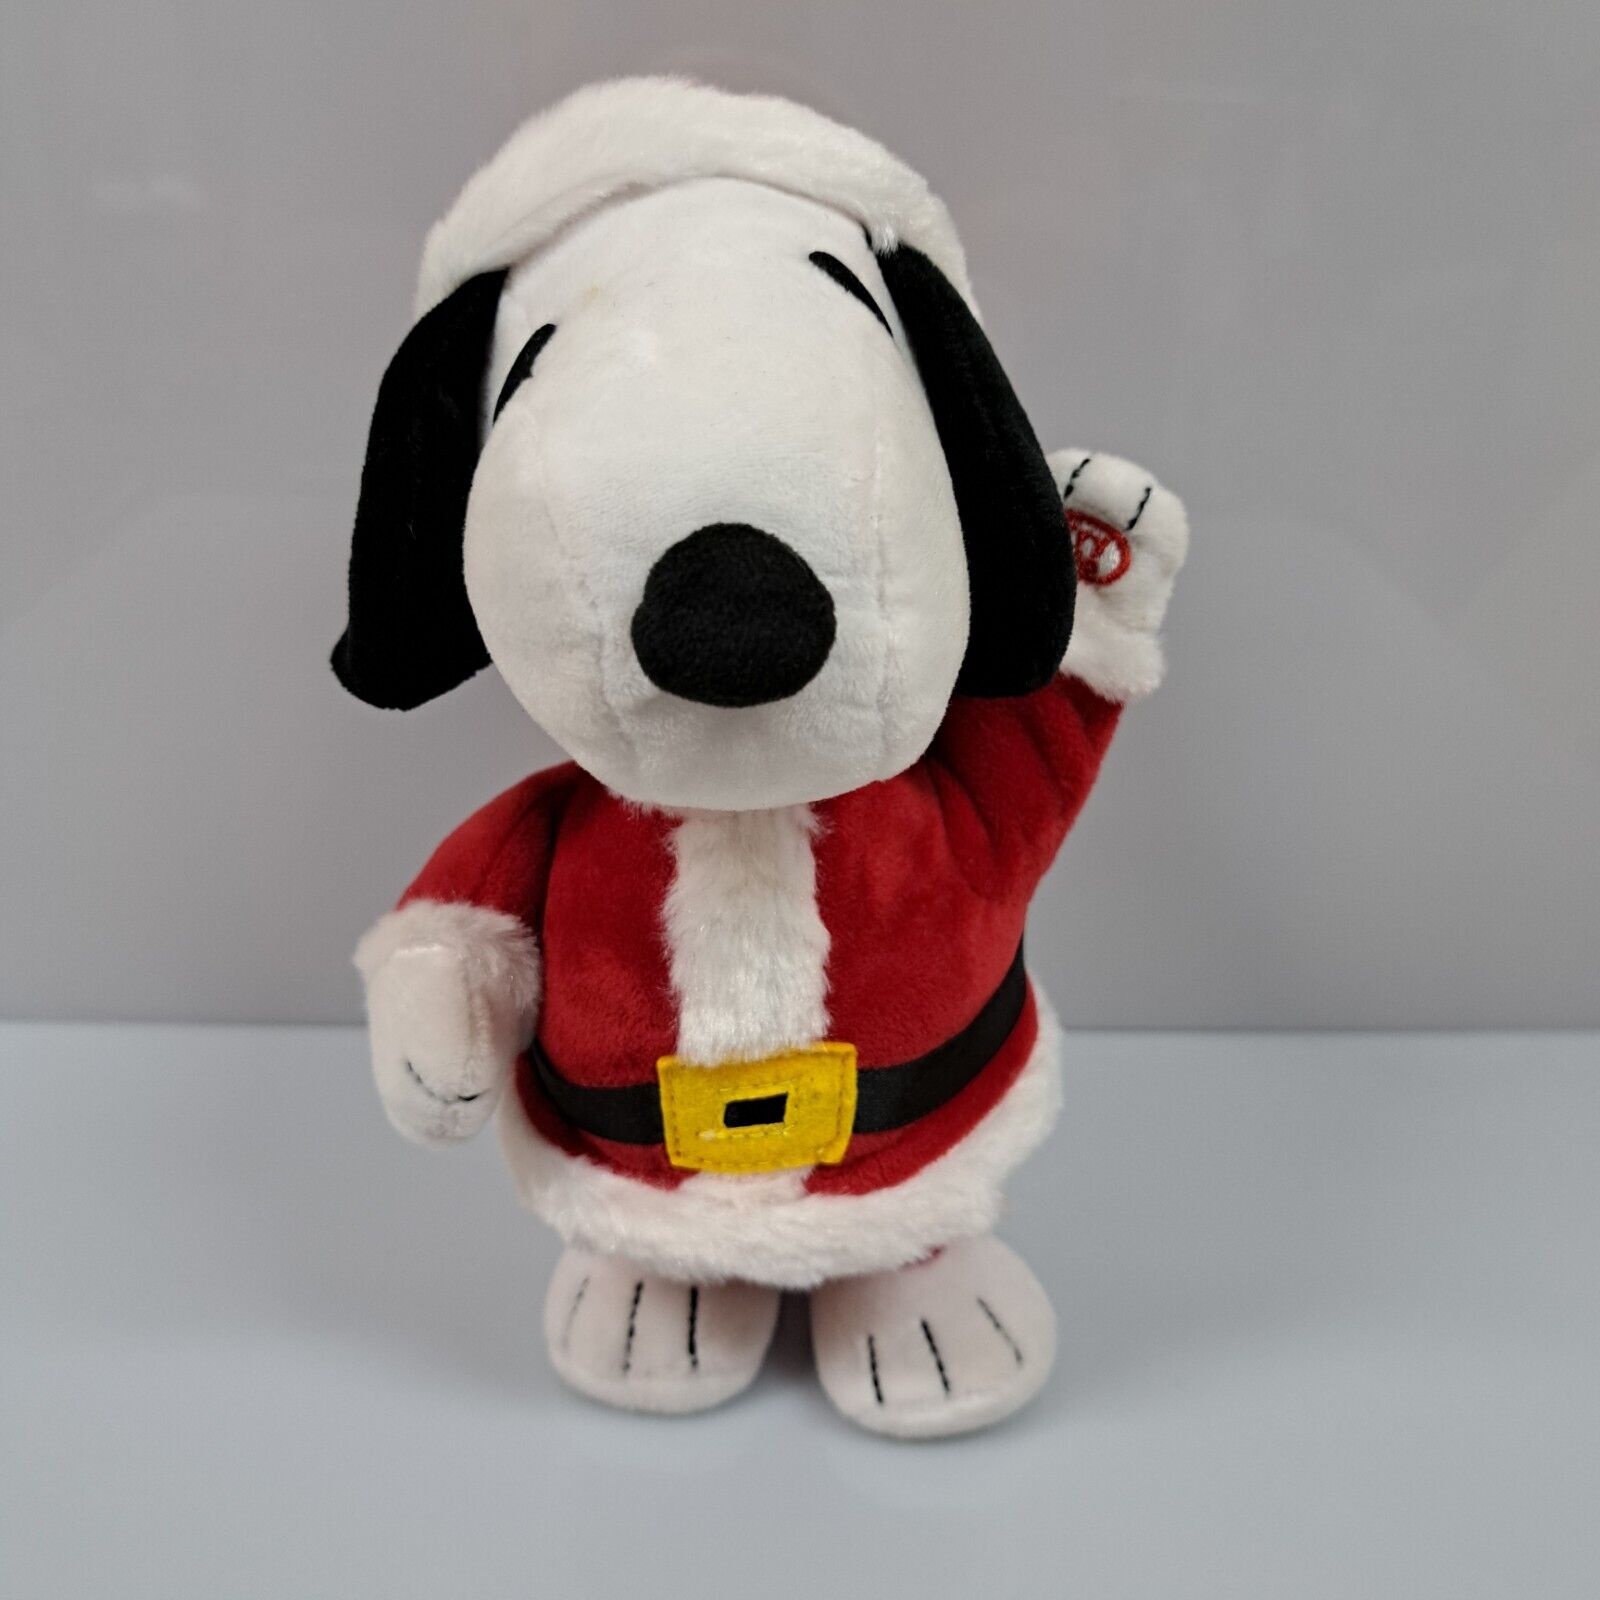 Gemmy Peanuts Dancing Animated Santa Snoopy We Wish You A Merry Christmas 2016